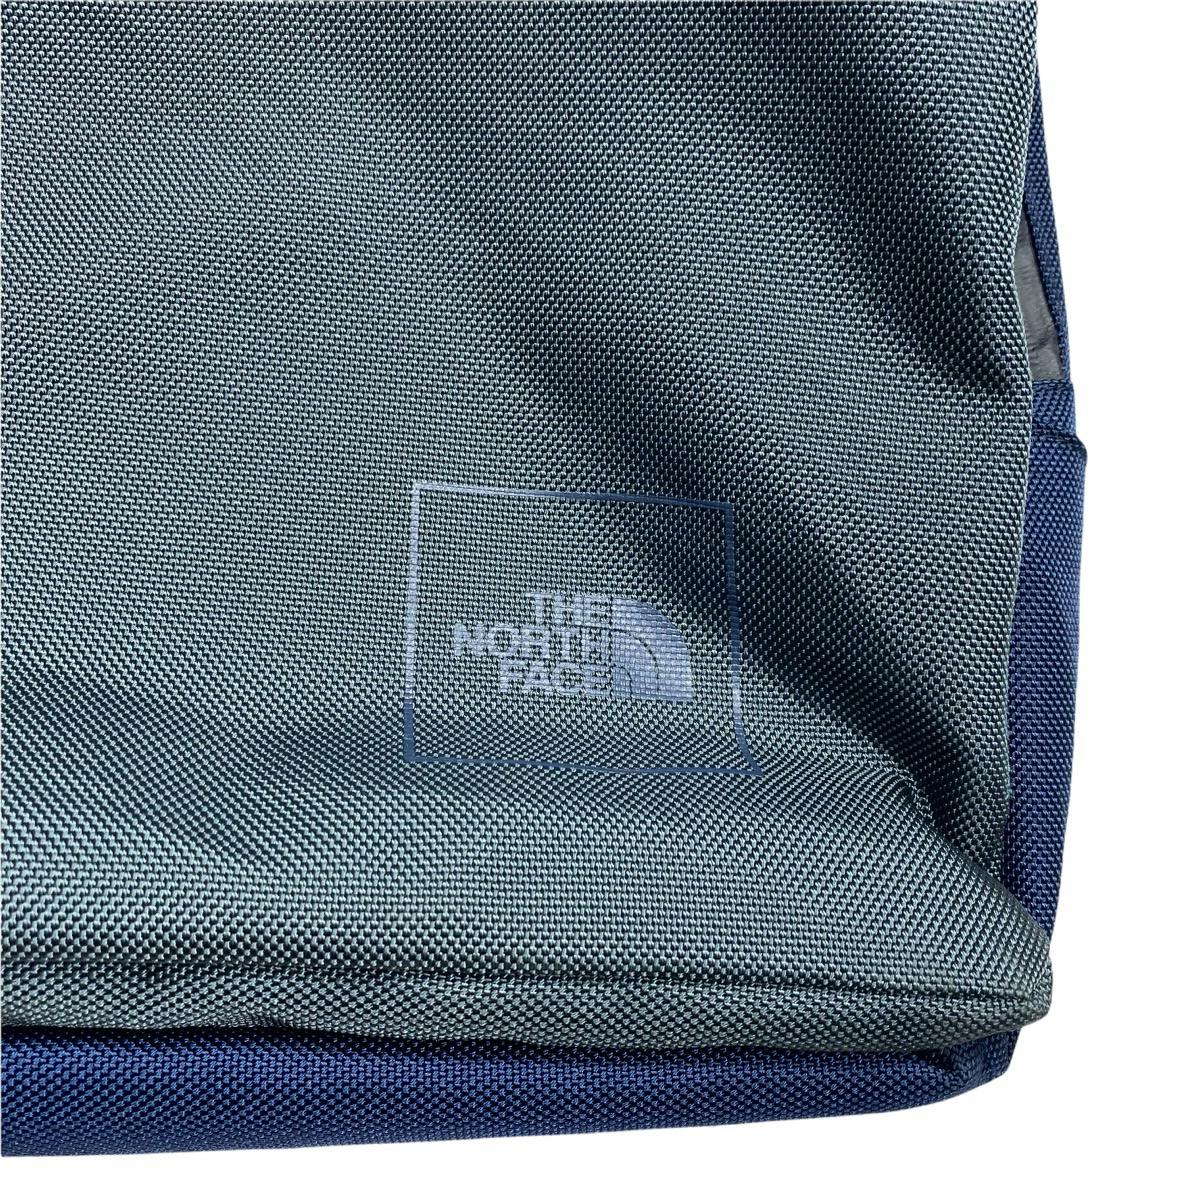 The North Face Shuttle Series Pack Project Messenger Bag - 4